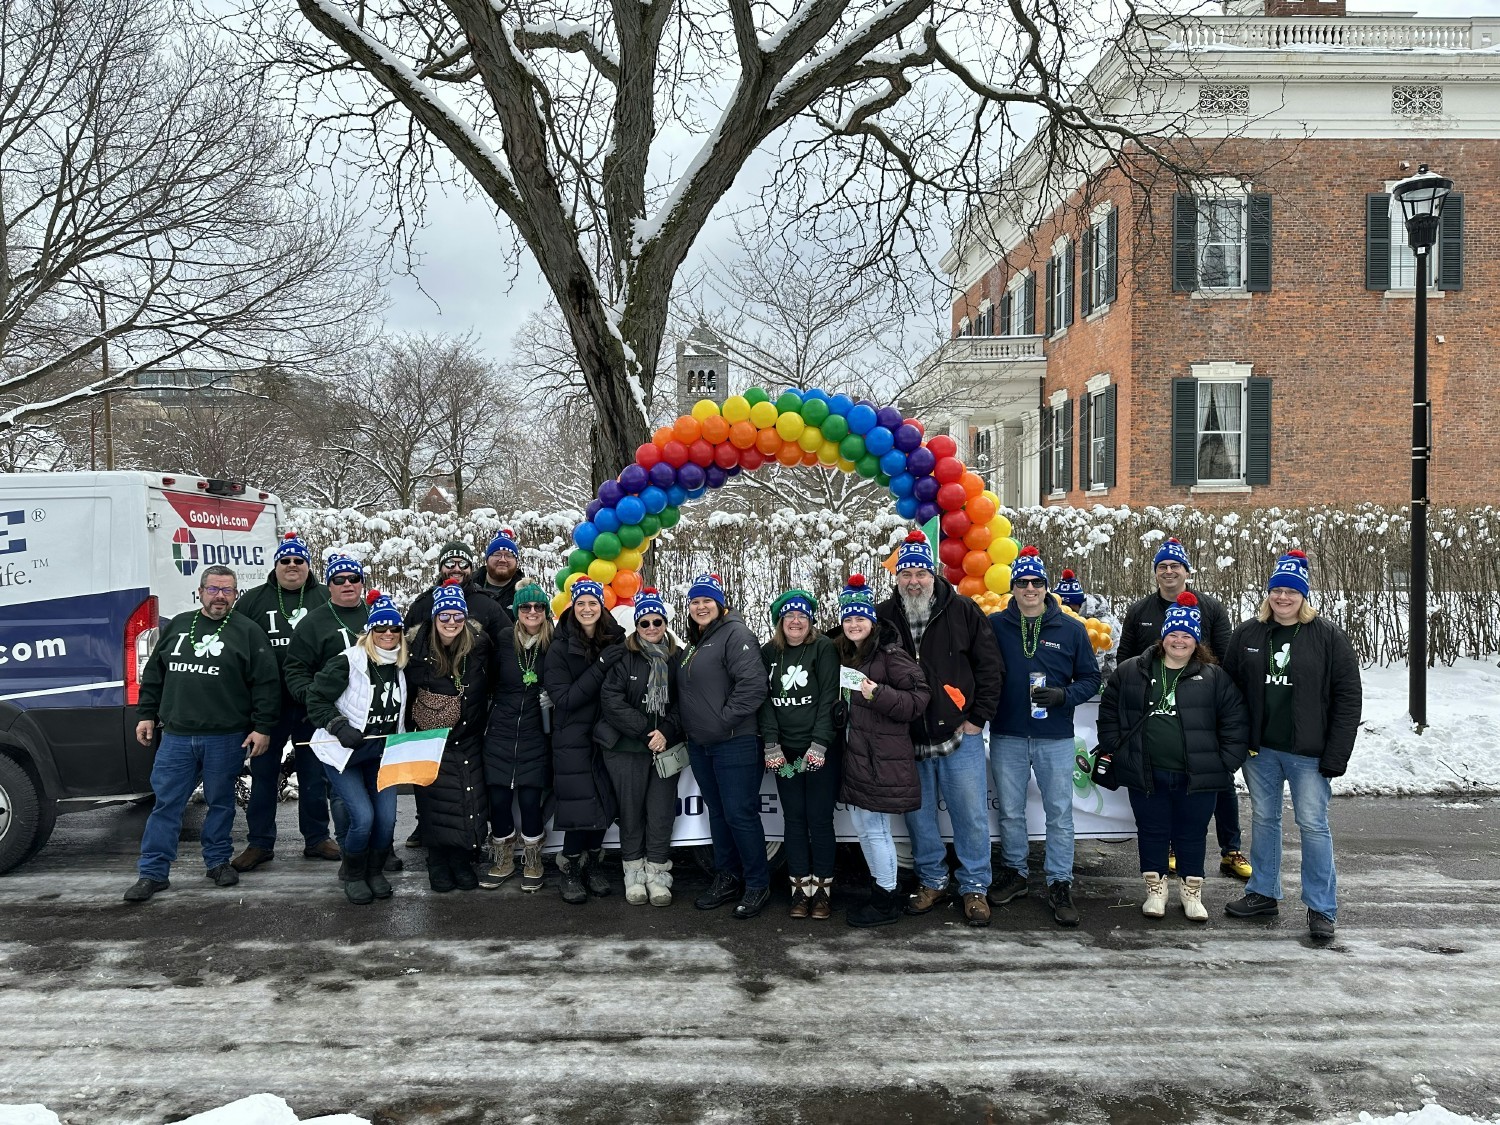 Celebrating 104 years of Doyle Security with the Rochester, NY St. Patrick's Day parade